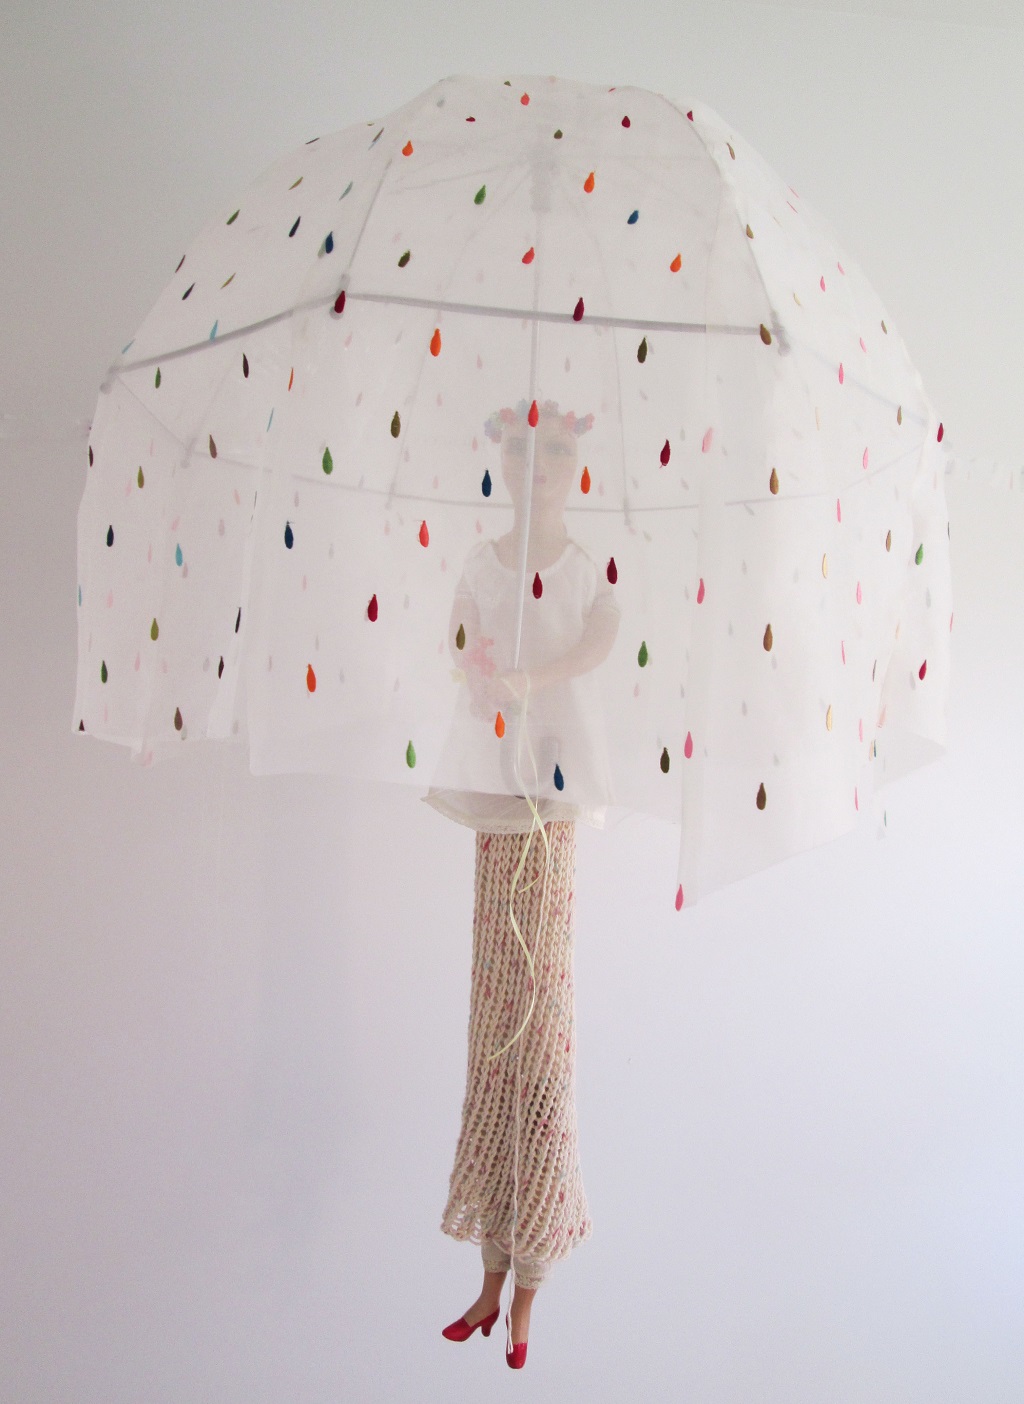 May Child; Old doll and doll clothes, string, umbrella, fabric, glass flowers; 47"h x 30"w x 30"d; 2015